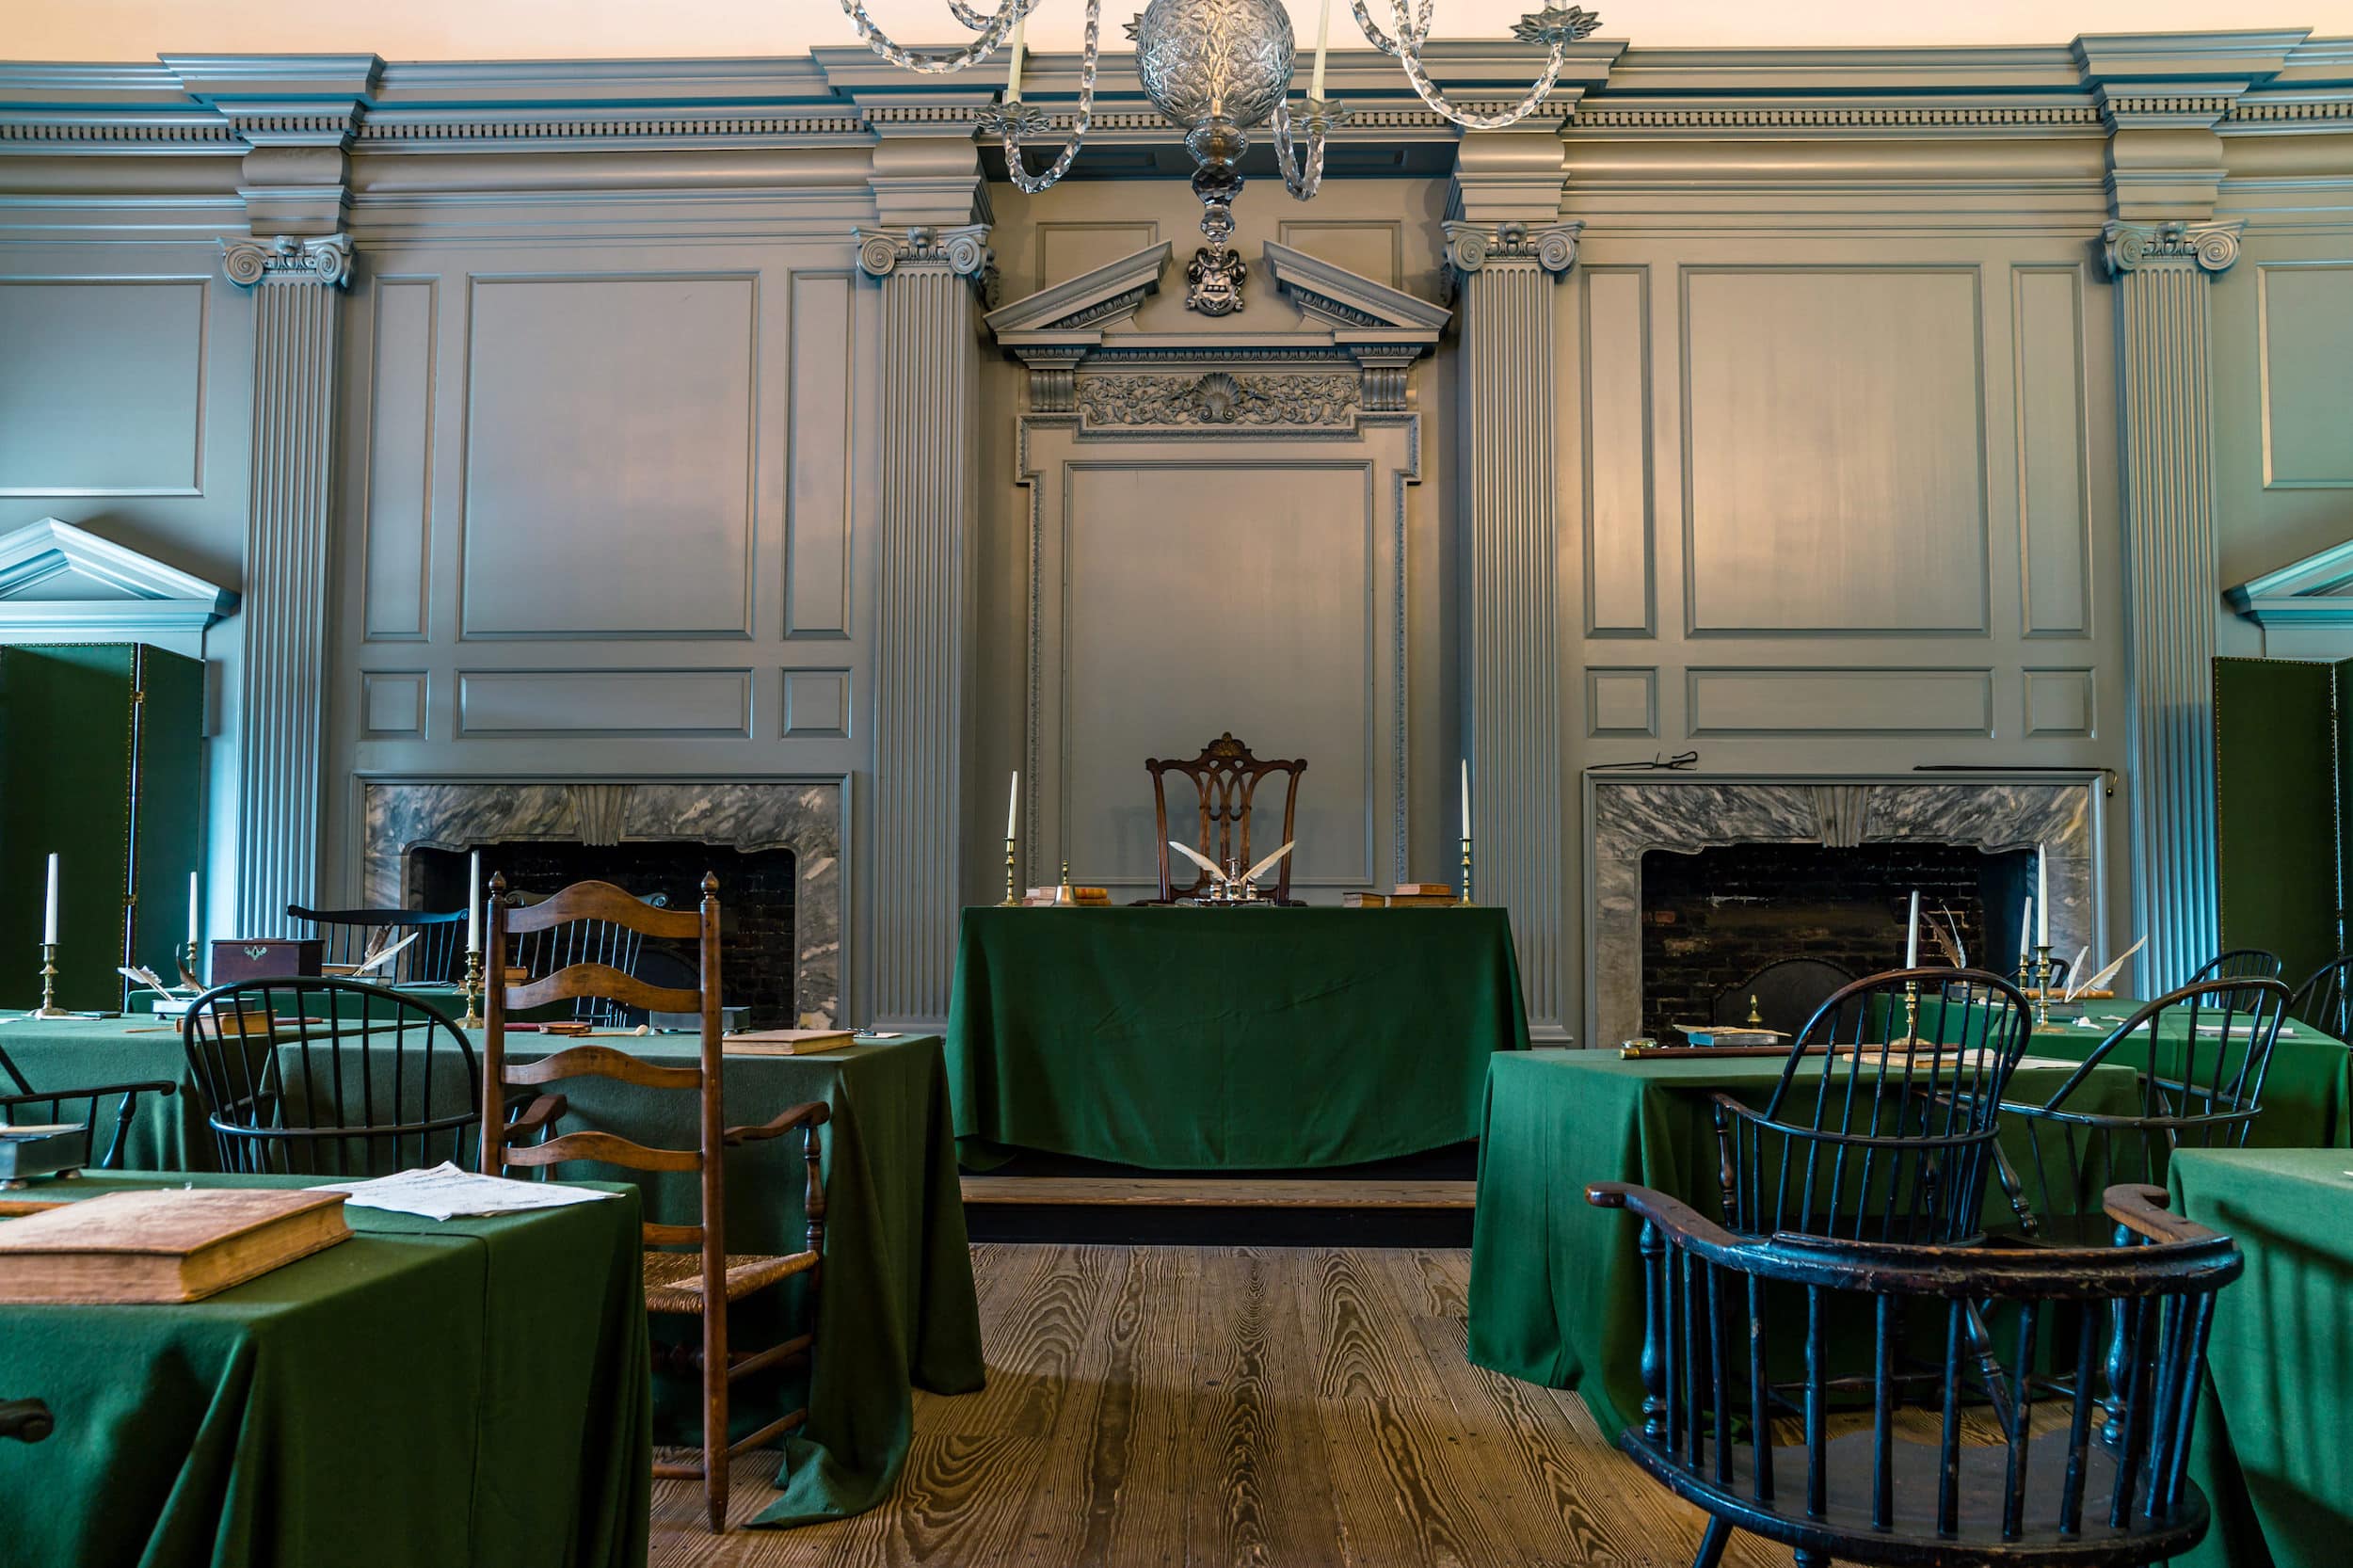 Room where the U.S. Constitution was written